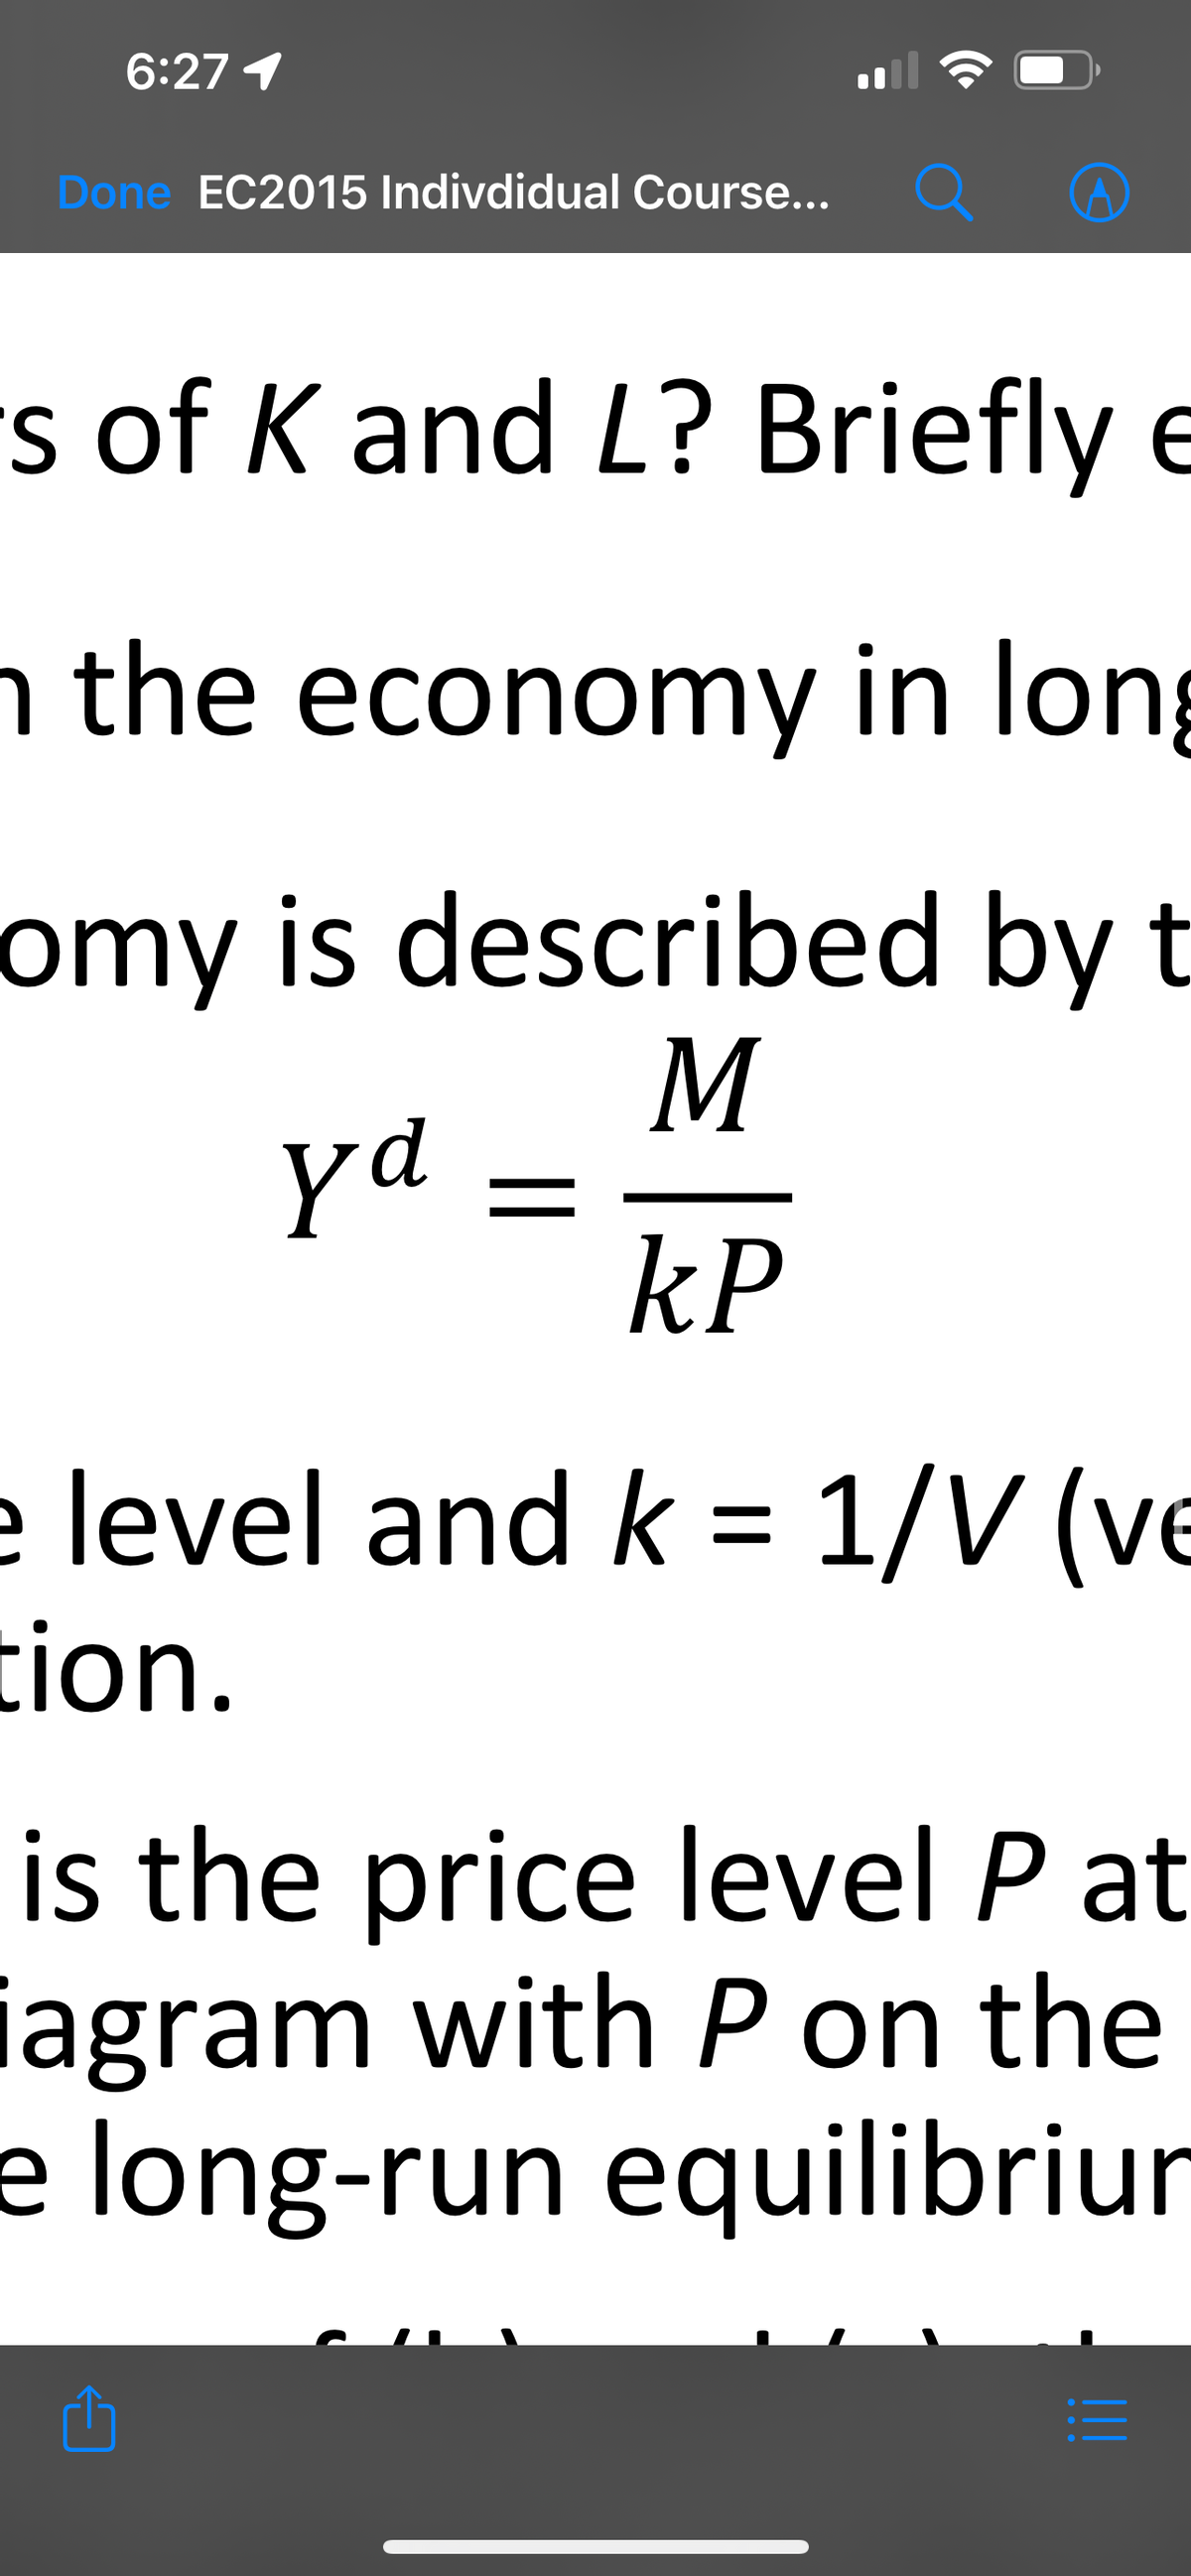 6:27 1
Done EC2015 Indivdidual Course...
s of K and L? Briefly e
n the economy in long
omy is described by t
M
kP
yd
=
e level and k = 1/V (ve
tion.
is the price level Pat
iagram with P on the
e long-run equilibriur
|||